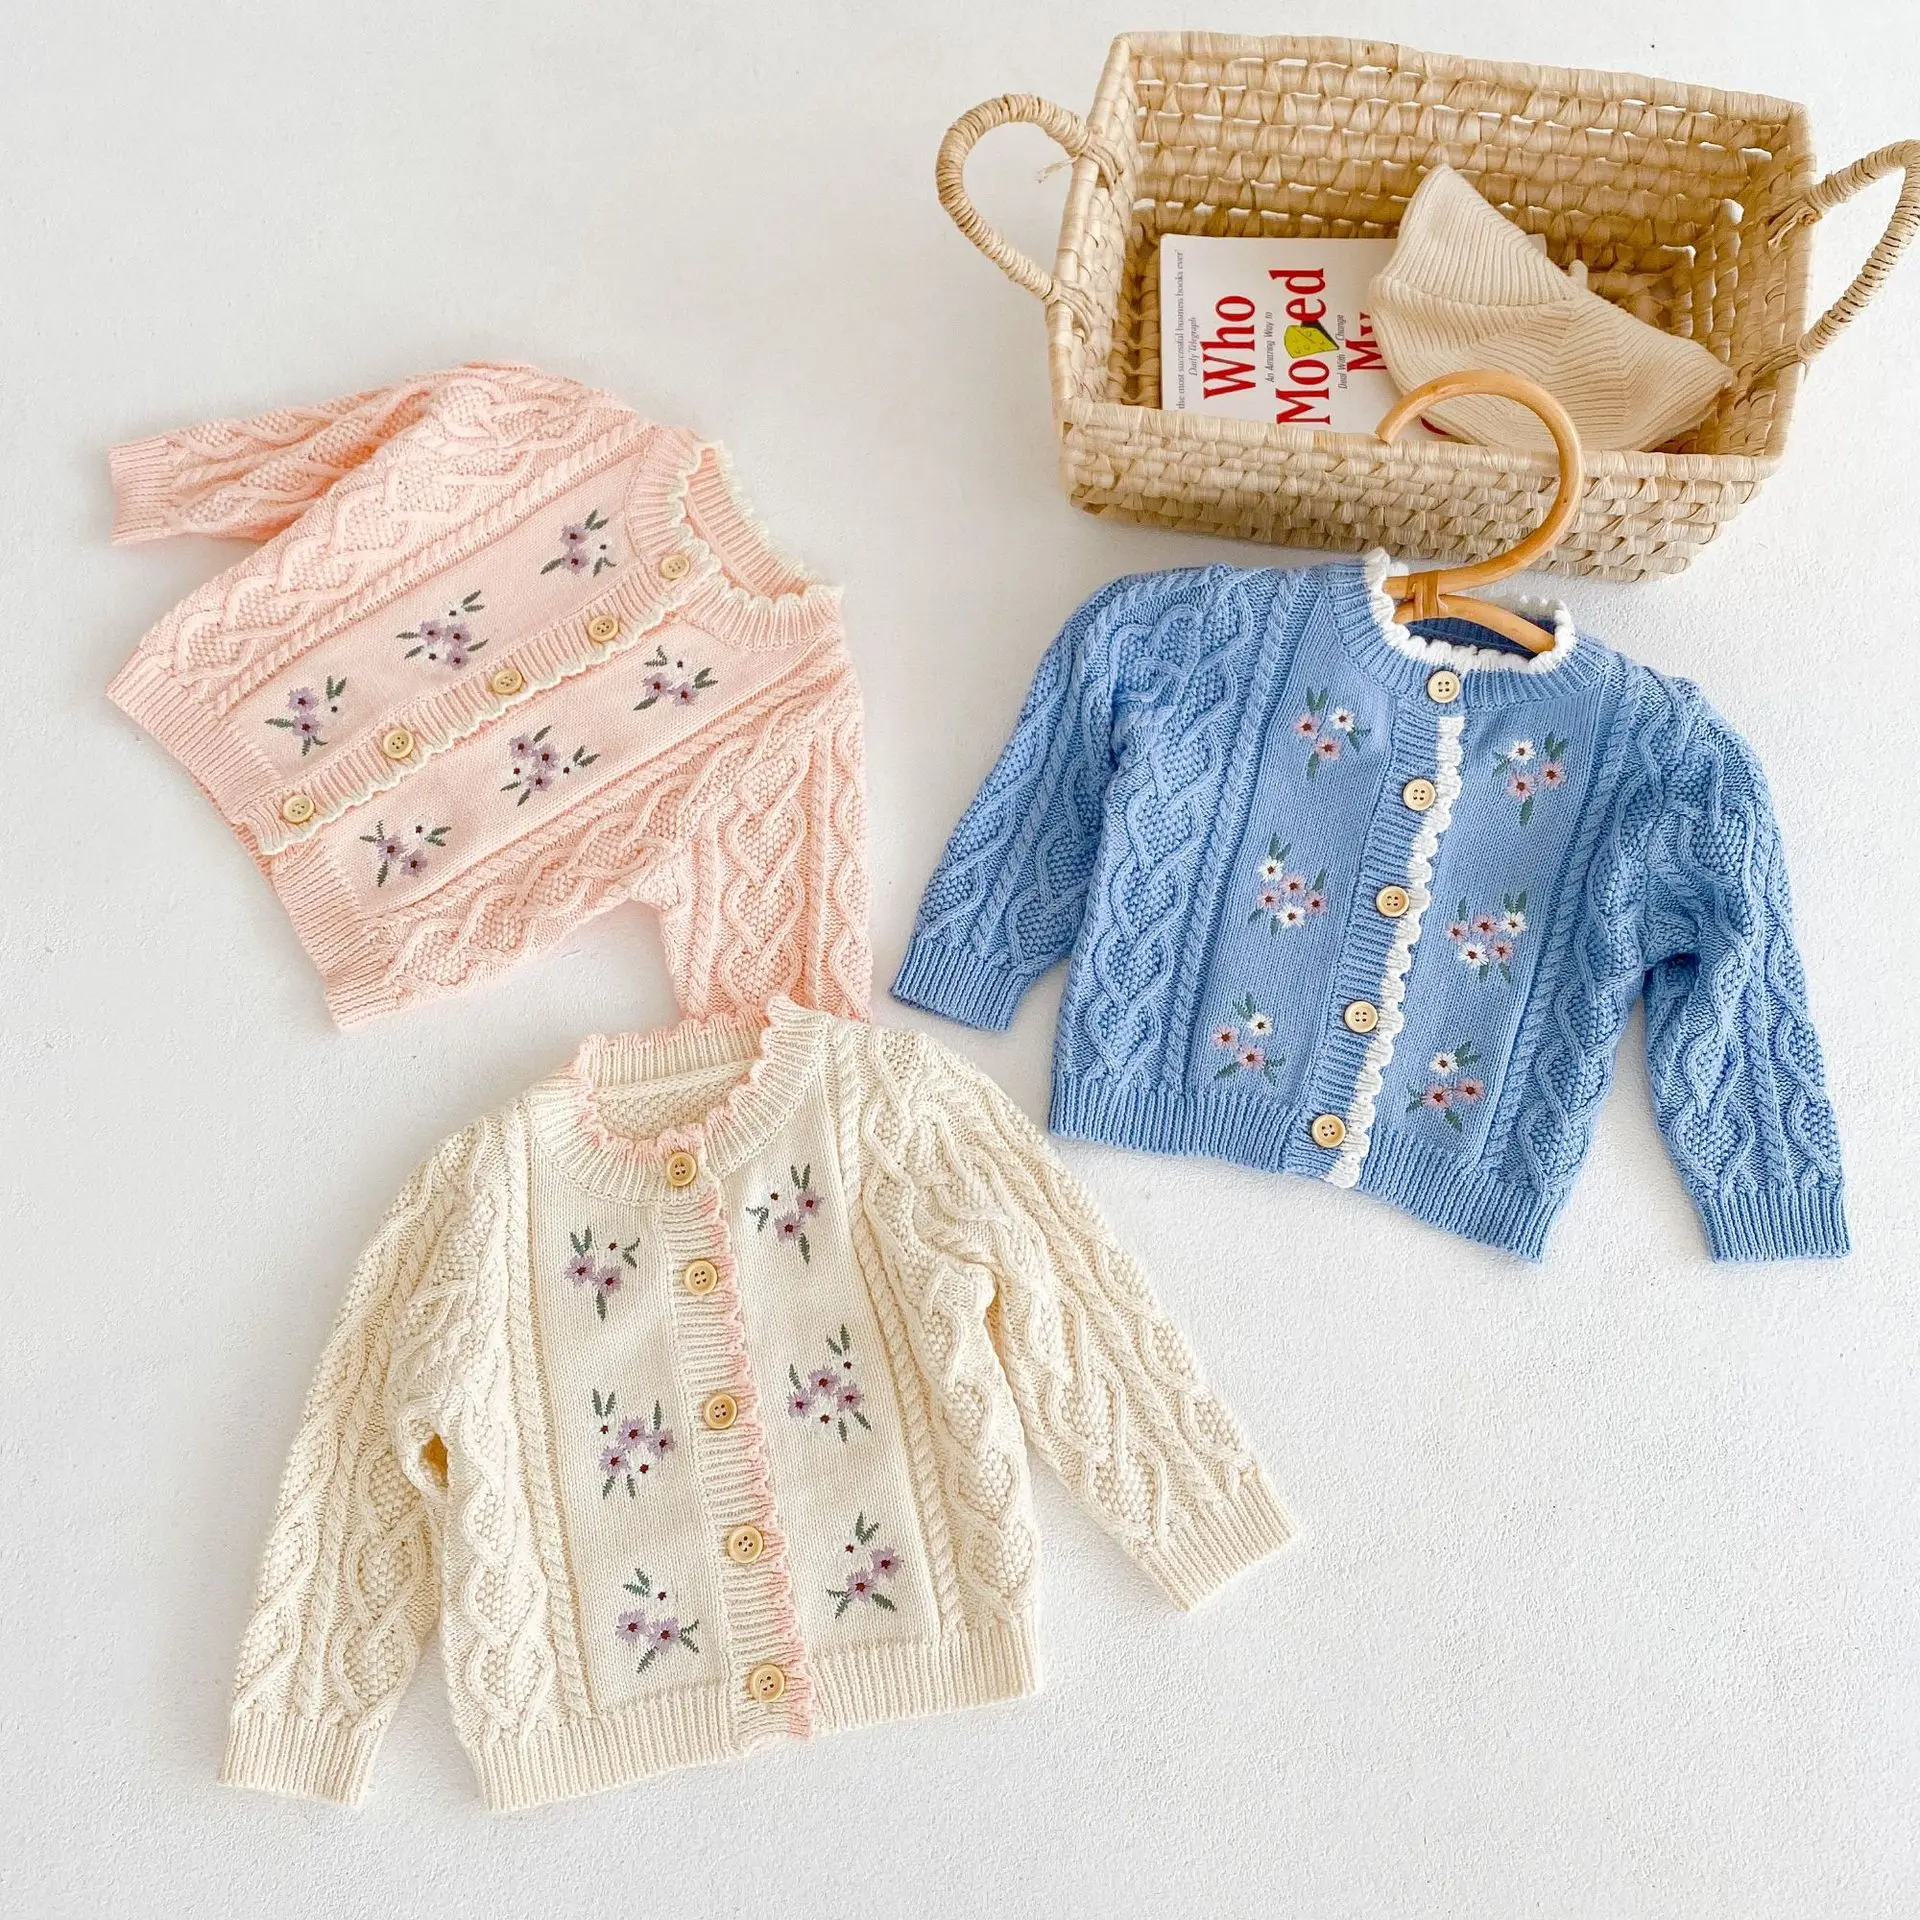 Instagram Popular Baby Winter Outfits Flower Embroidery Cardigan Knitted Clothes Children Toddler Sweater Outerwear